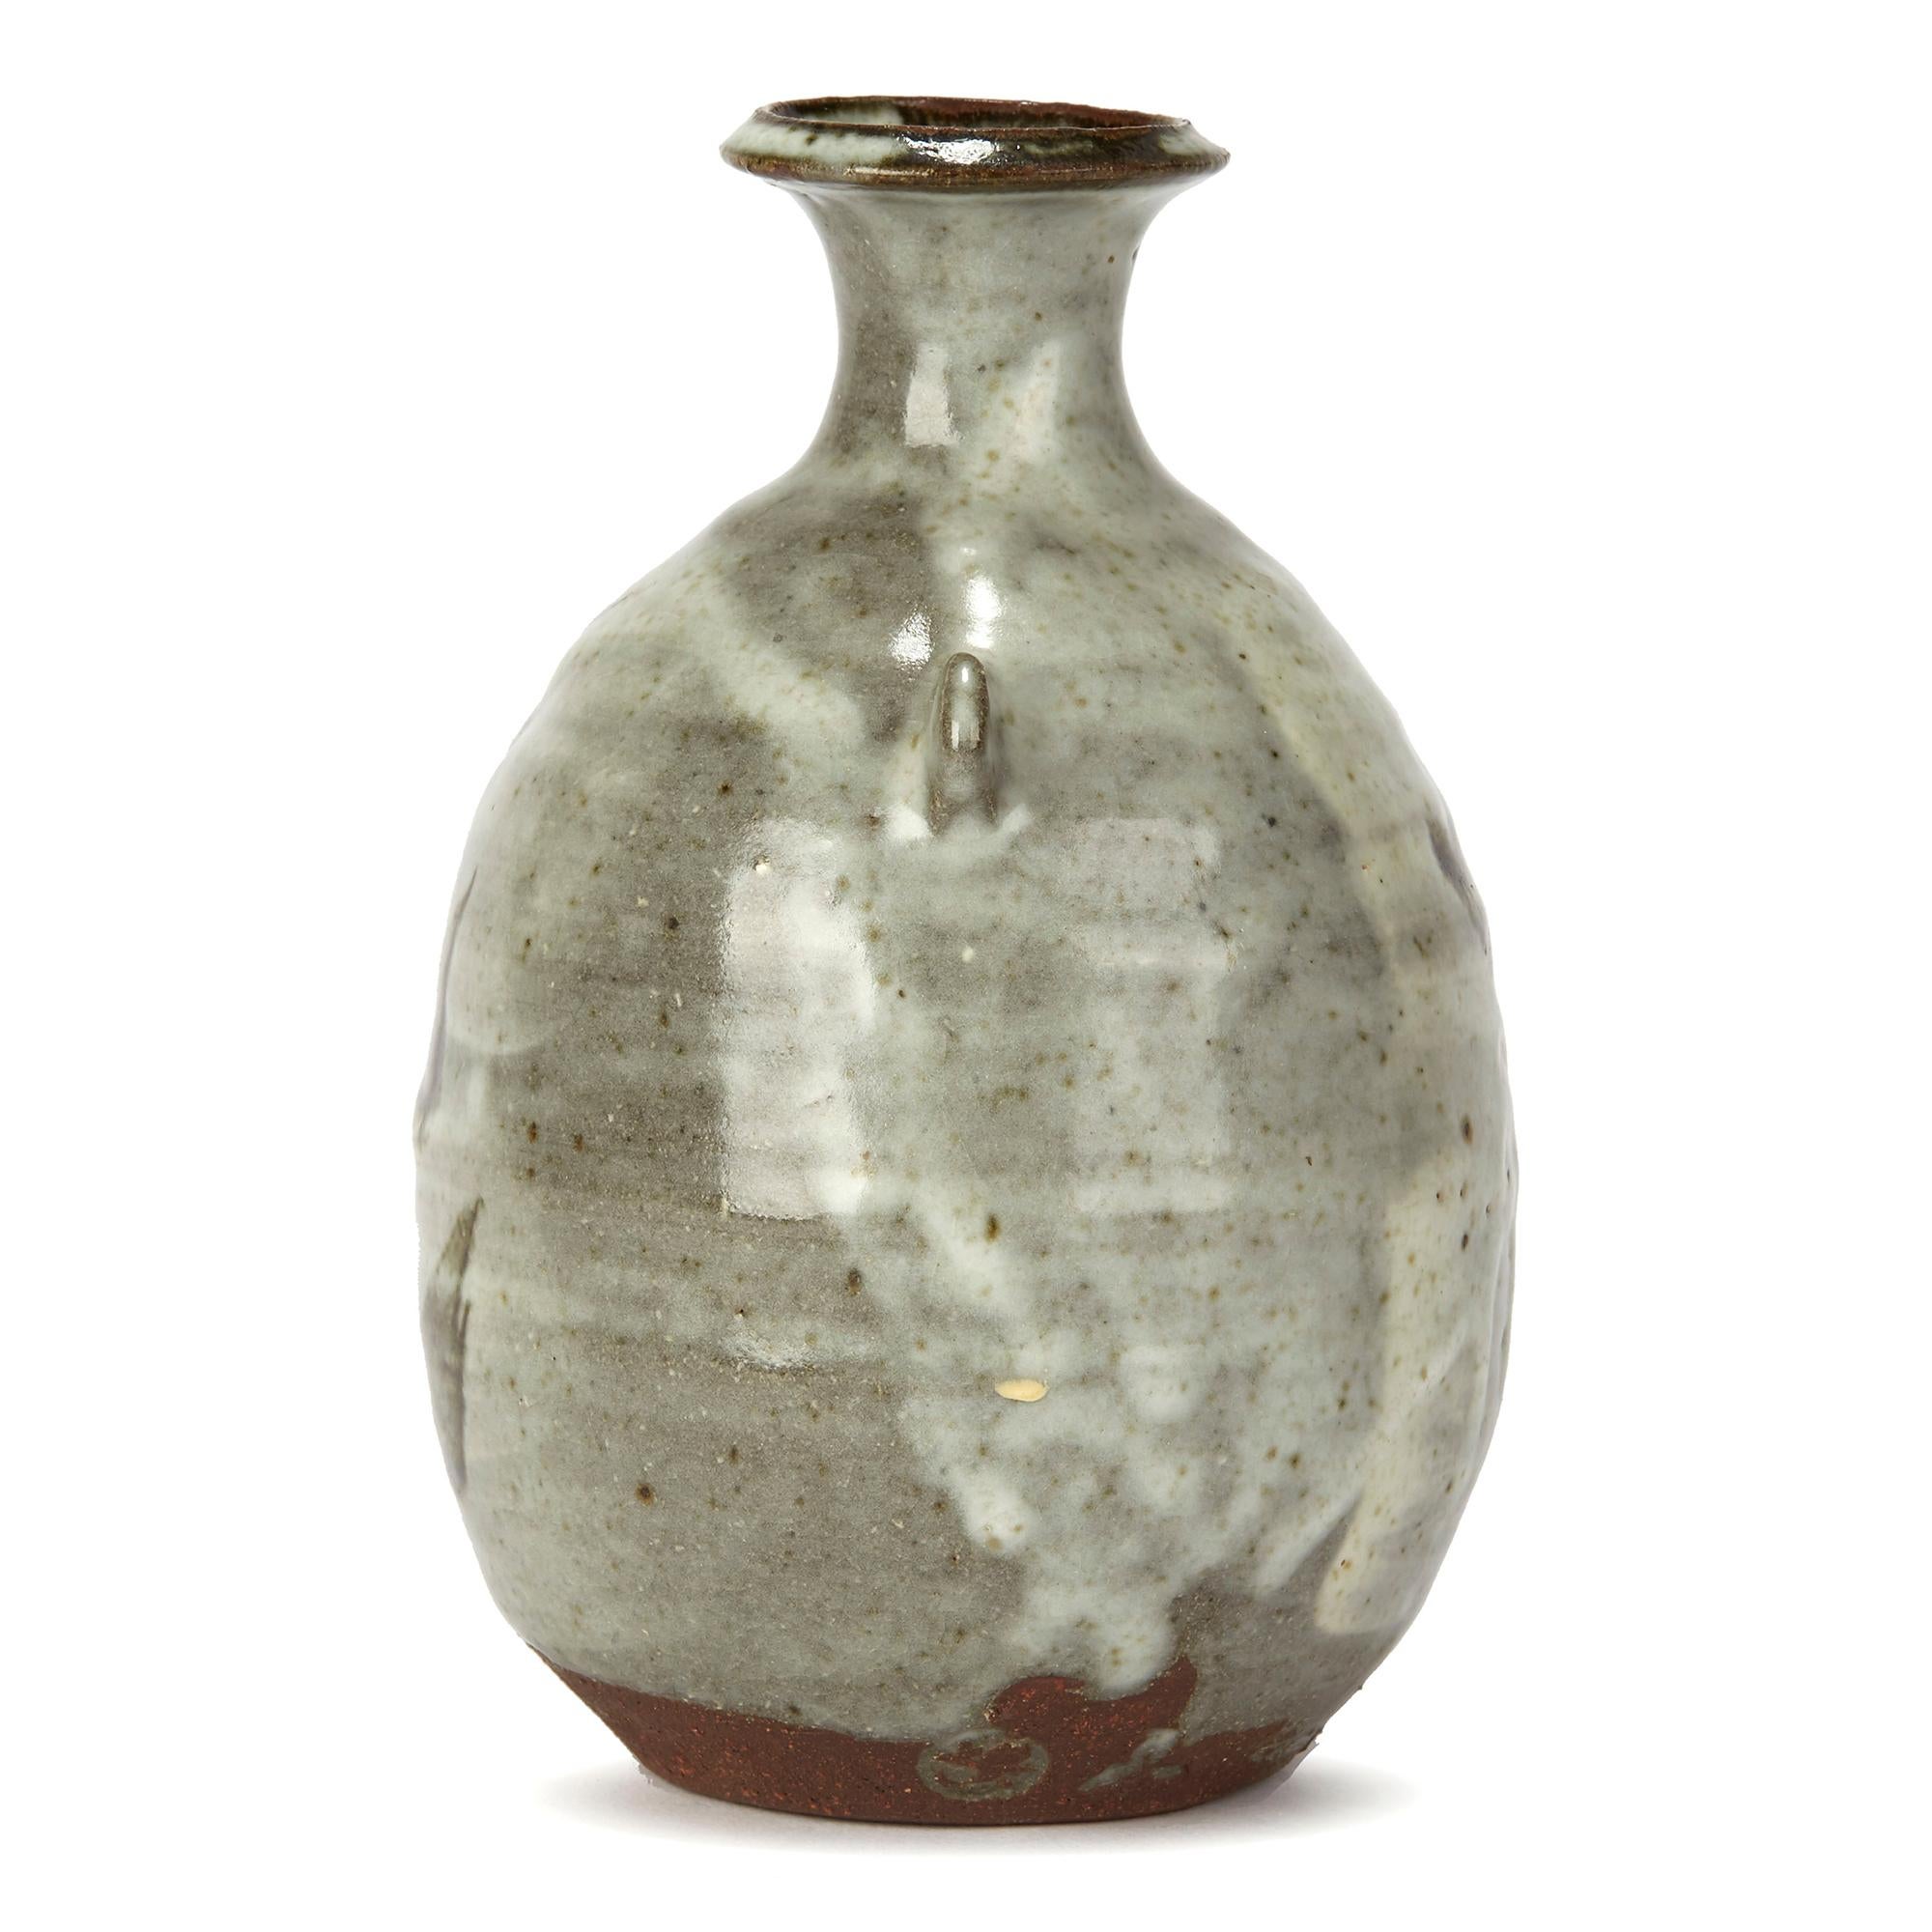 A stylish Leach pottery stoneware bottle shaped studio pottery vase decorated with contrasting abstract bird like designs set within expressive white run splashes on a stone grey ground by renowned potter Janet Leach (American, 1918-1997). The